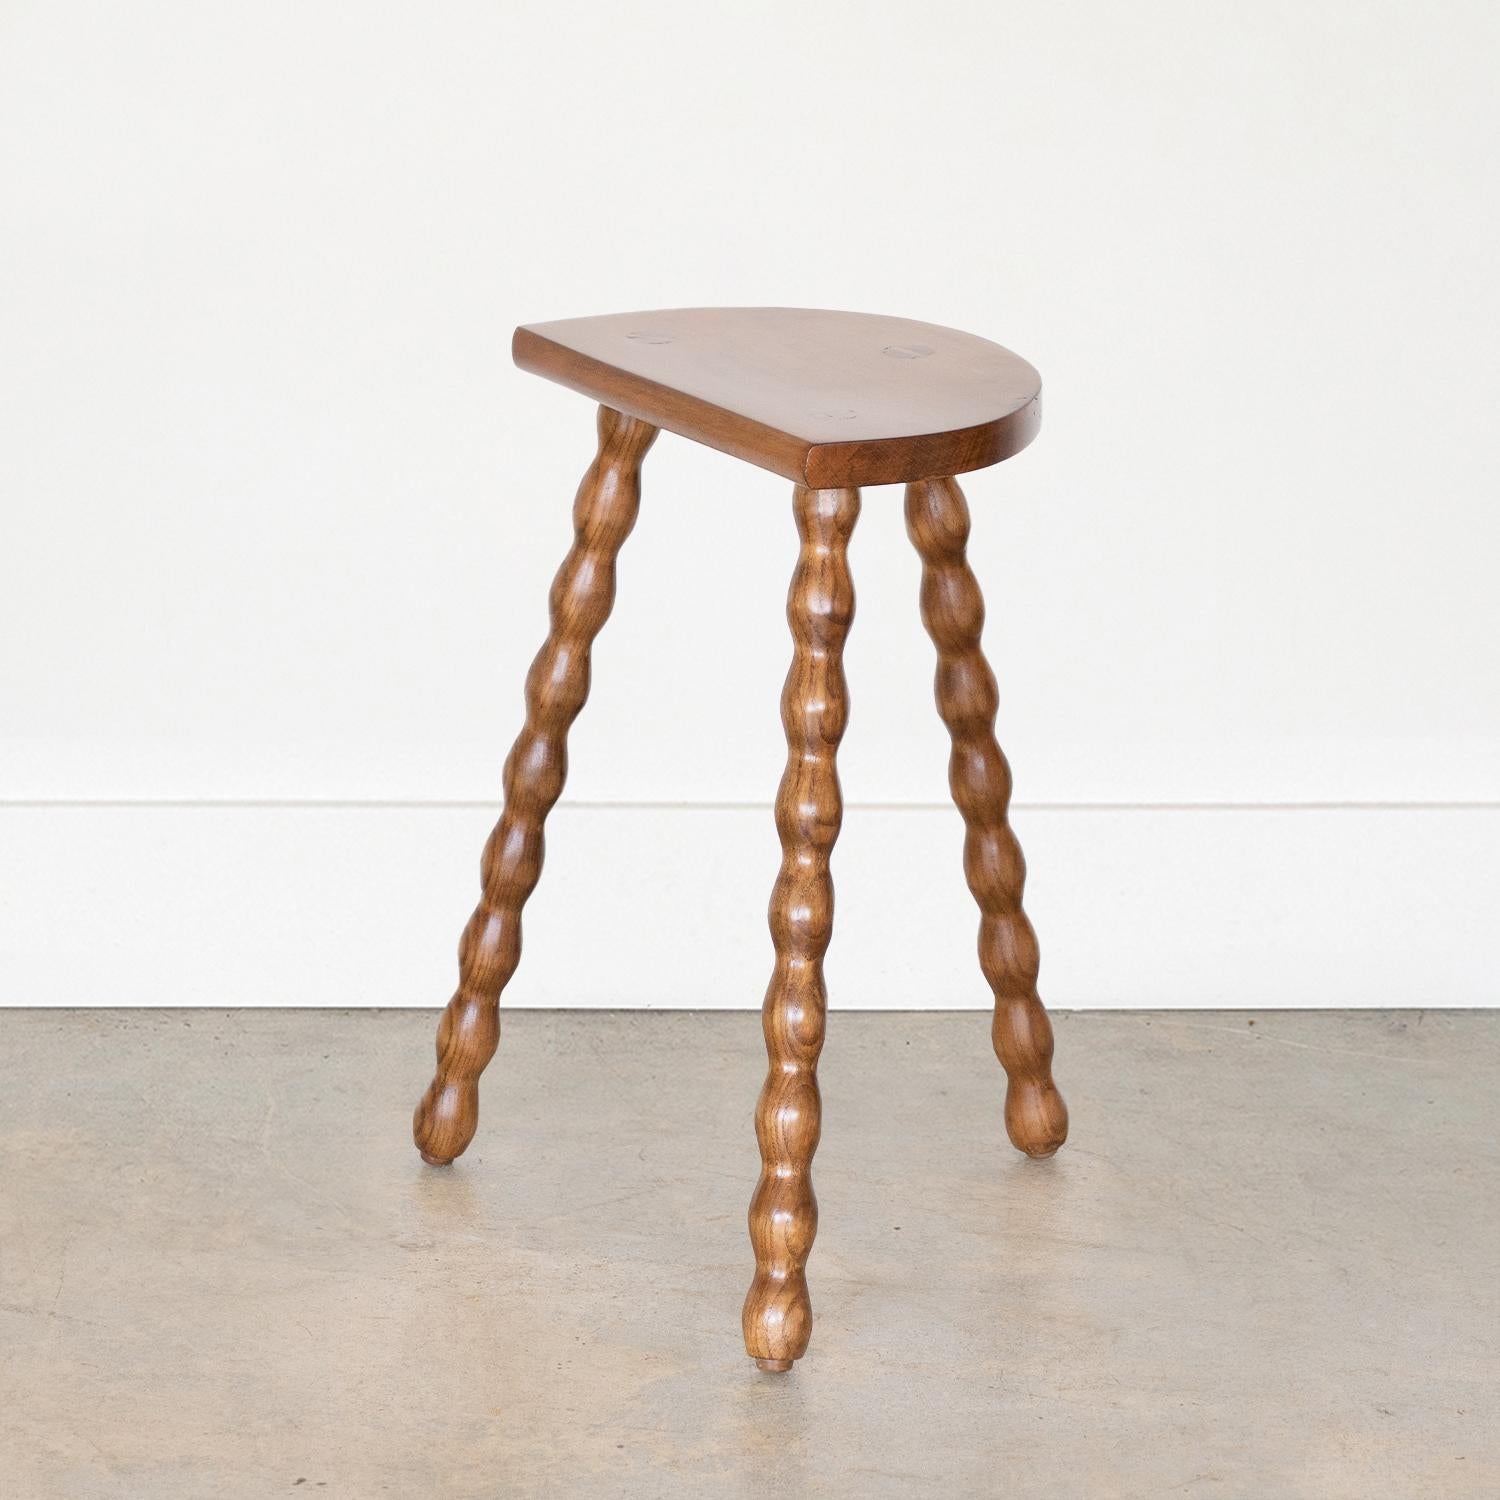 Vintage tall wood stool with semi-circle seat and wavy tripod legs from France. Newly refinished. Can be used as a stool or as side table. 



